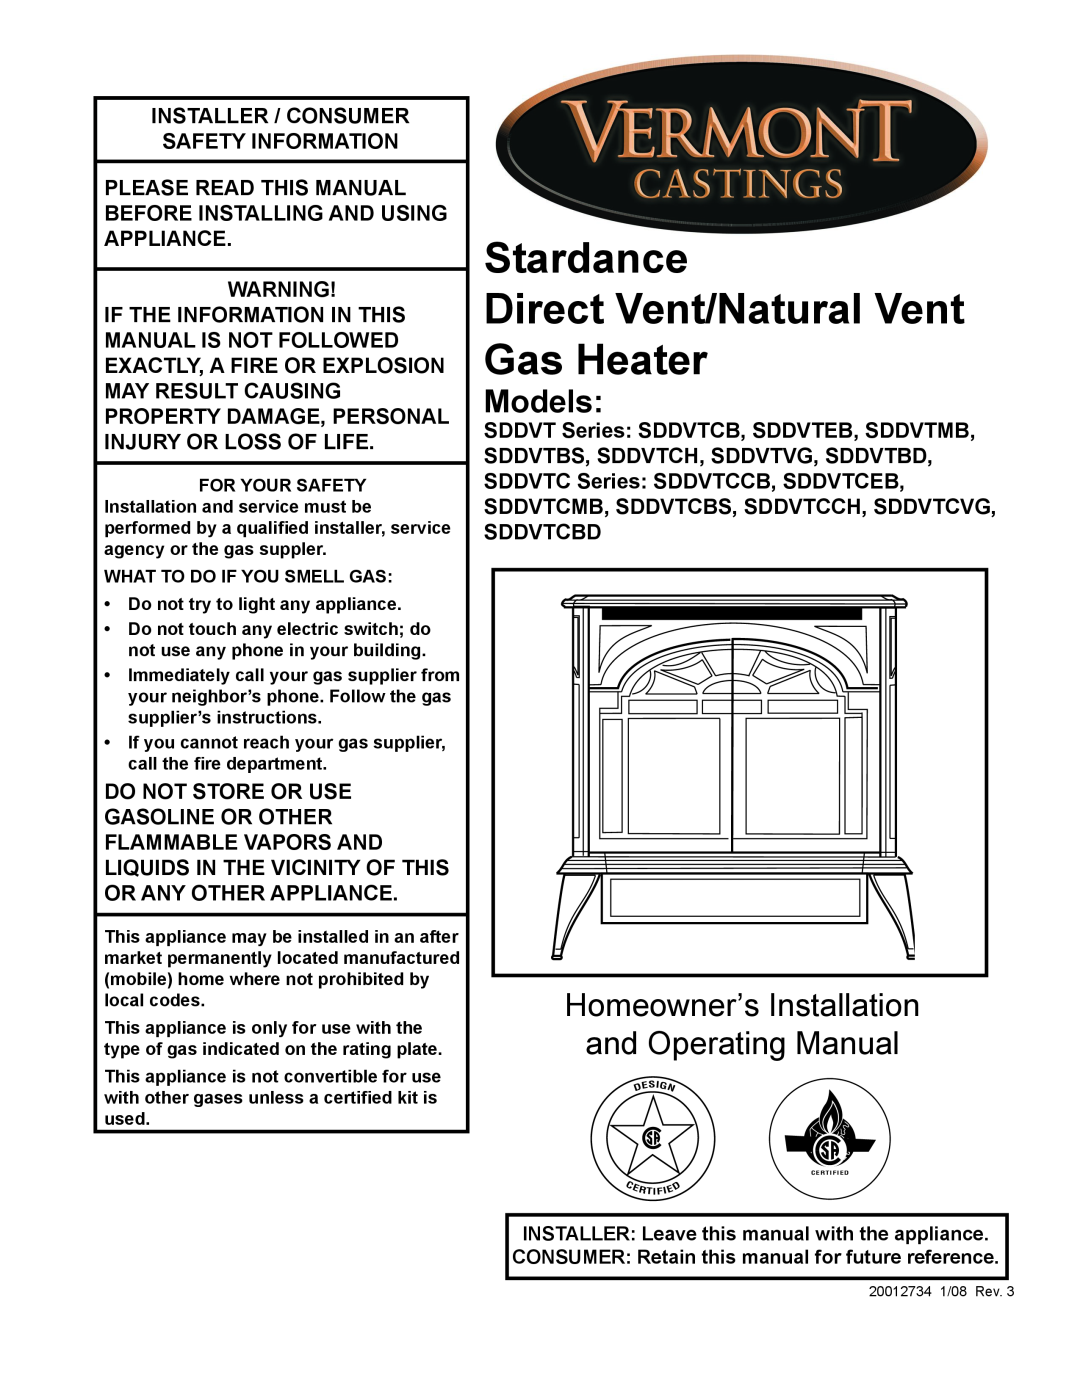 Vermont Casting SDDVTCMB, SDDVTCVG manual Models, Installer / Consumer Safety Information, Do Not Store Or Use 